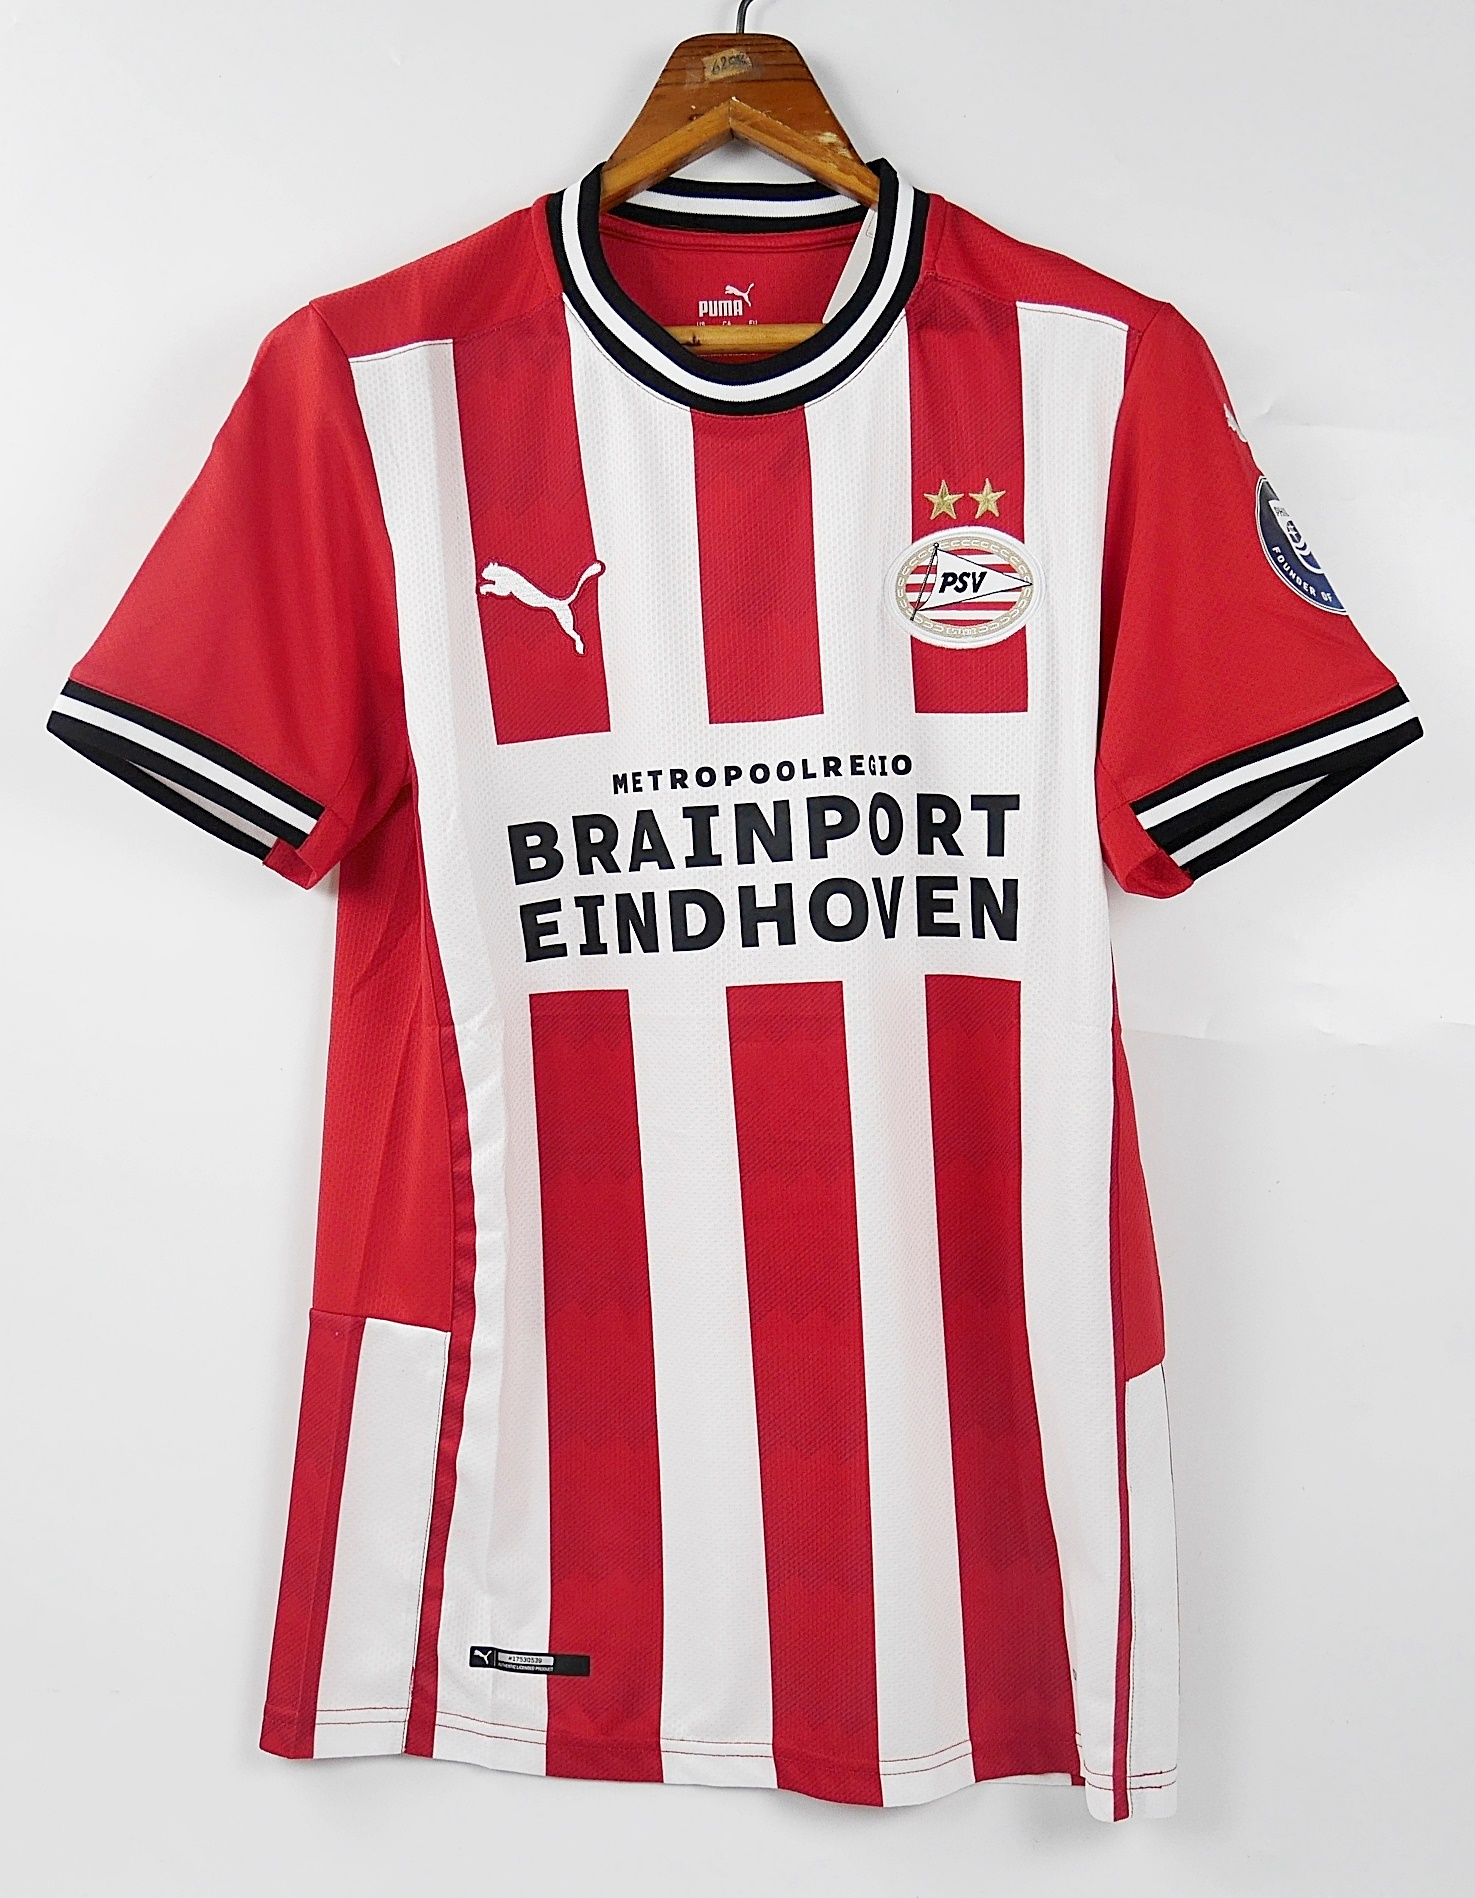 PSV eindhoven HOME 2020 - 2021 RED FOOTBALL SHIRT SOCCER JERSEY